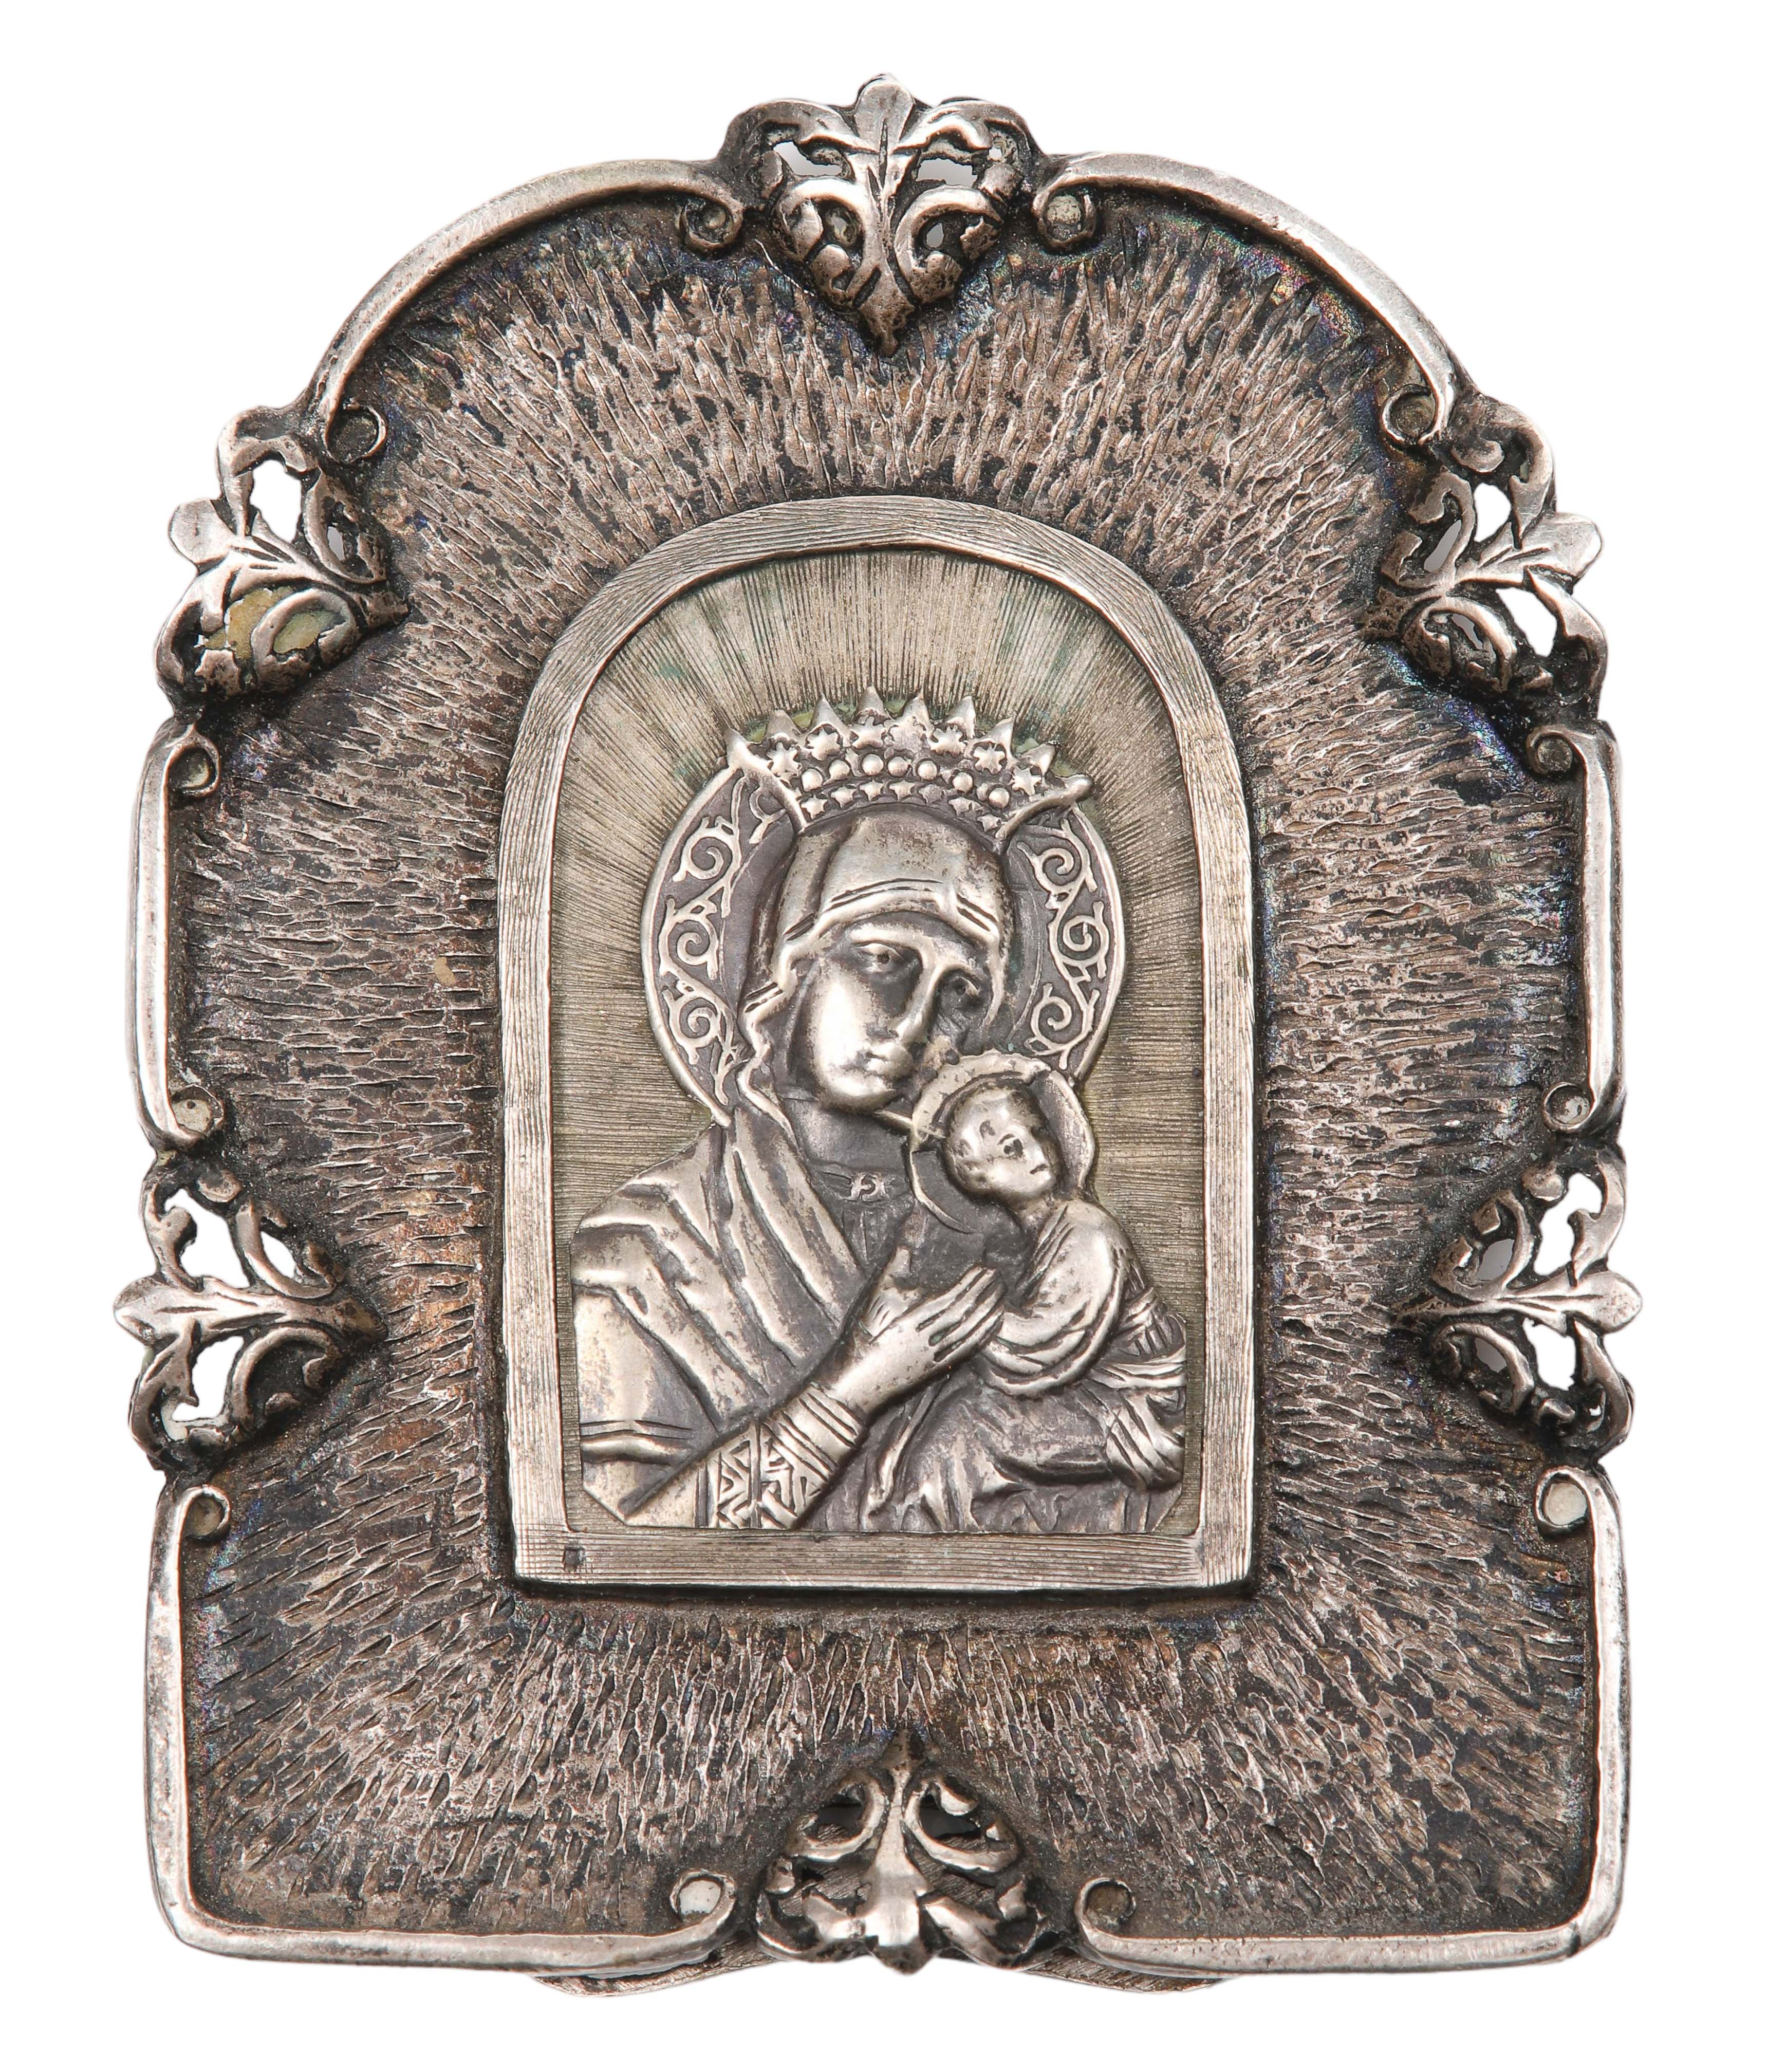 A Russian silver icon on stand  2e1cfb